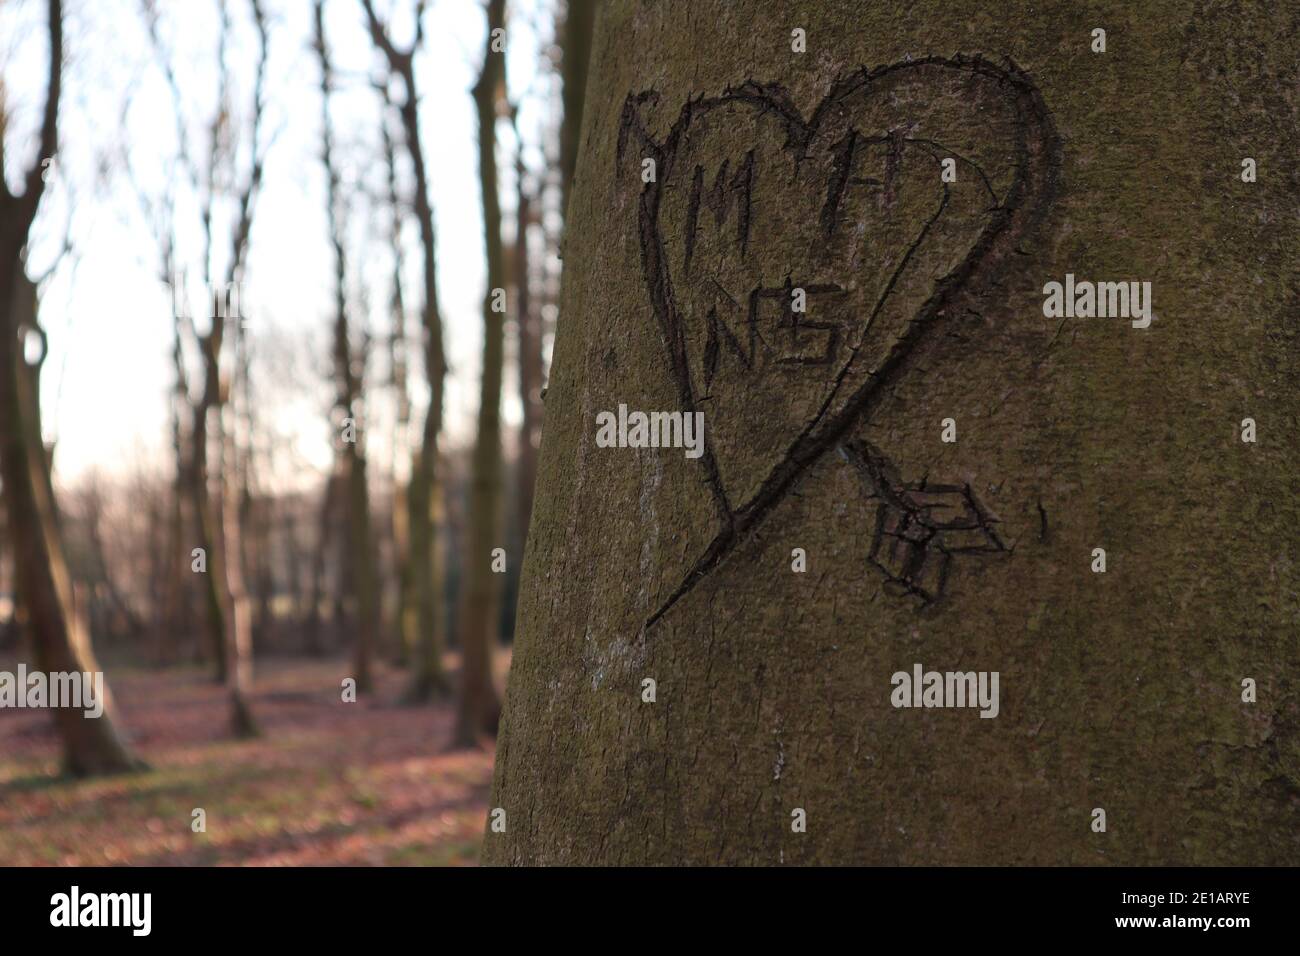 Love heart carved on a tree Stock Photo